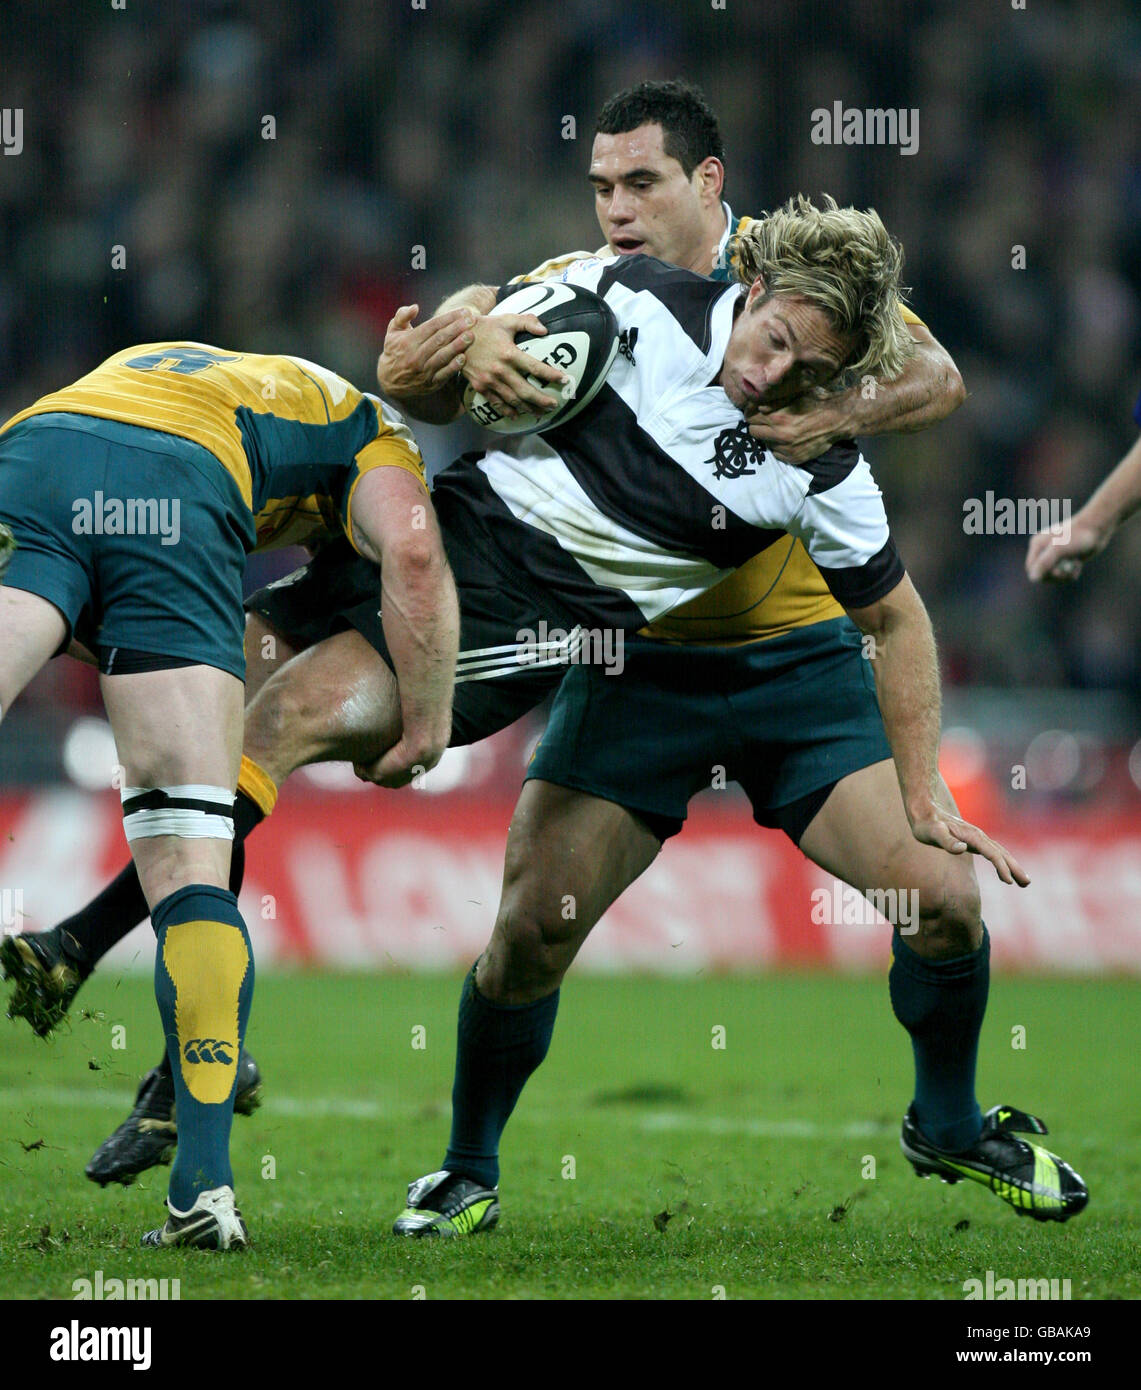 Rugby Union - BOA Centenary Celebration Match - Barbarians v Australia - Wembley Stadium. Barbarian's Percy Montgomery is floored by Australia's Richard Brown (L) and George Smith (R). Stock Photo